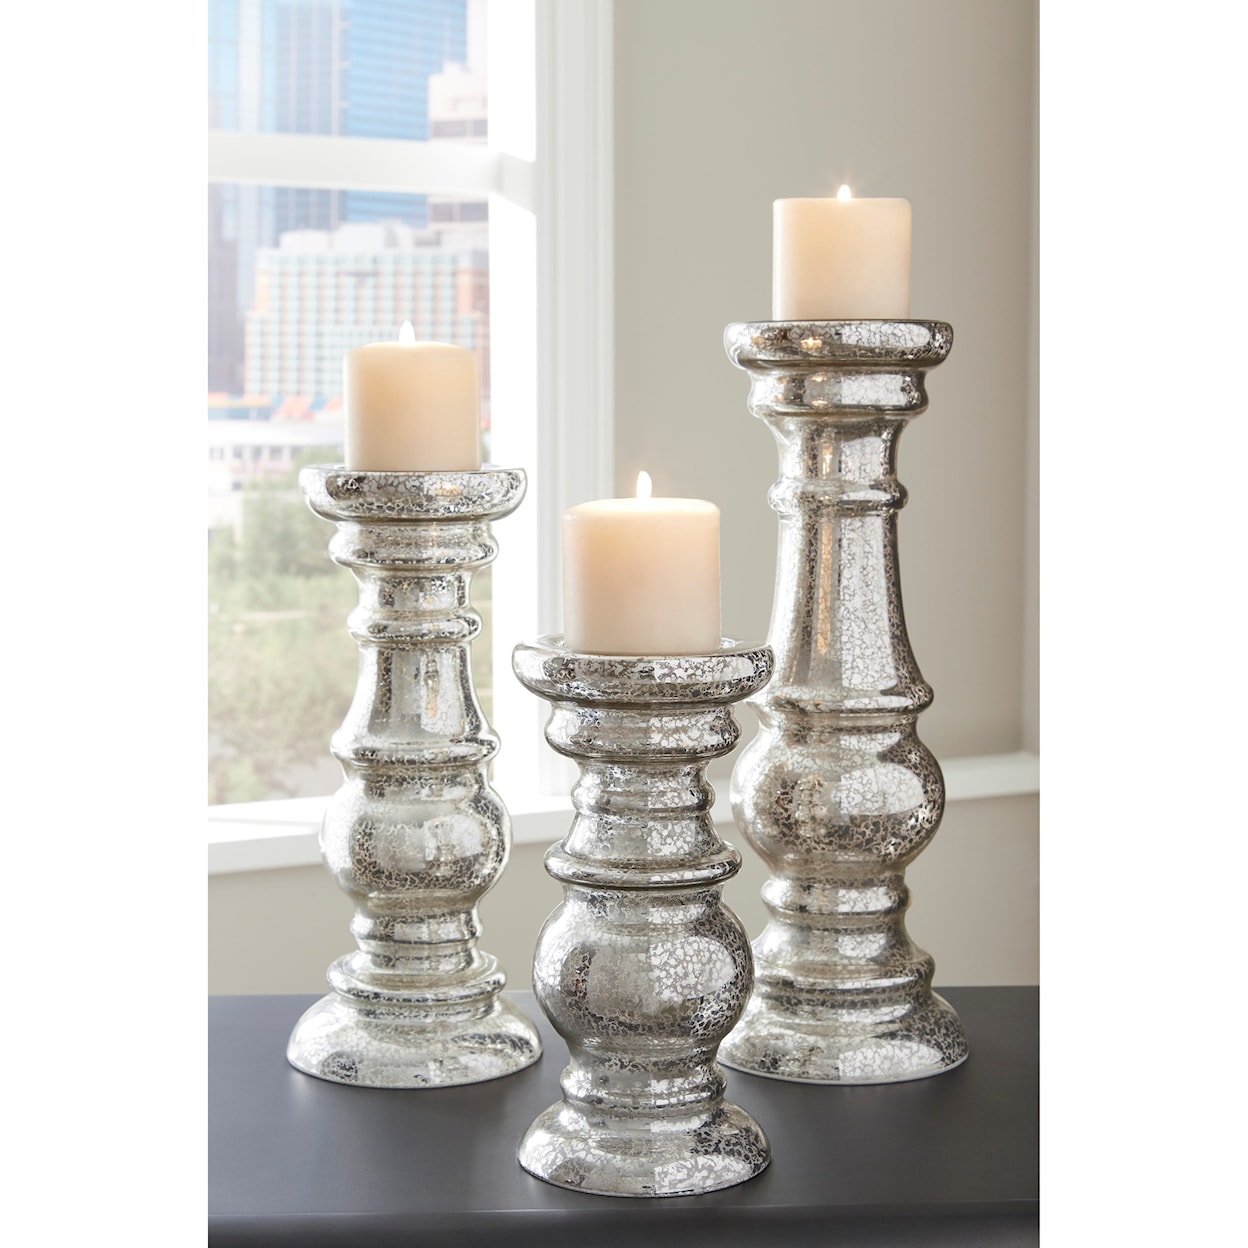 Benchcraft Accents Rosario Silver Finish Candle Holder Set